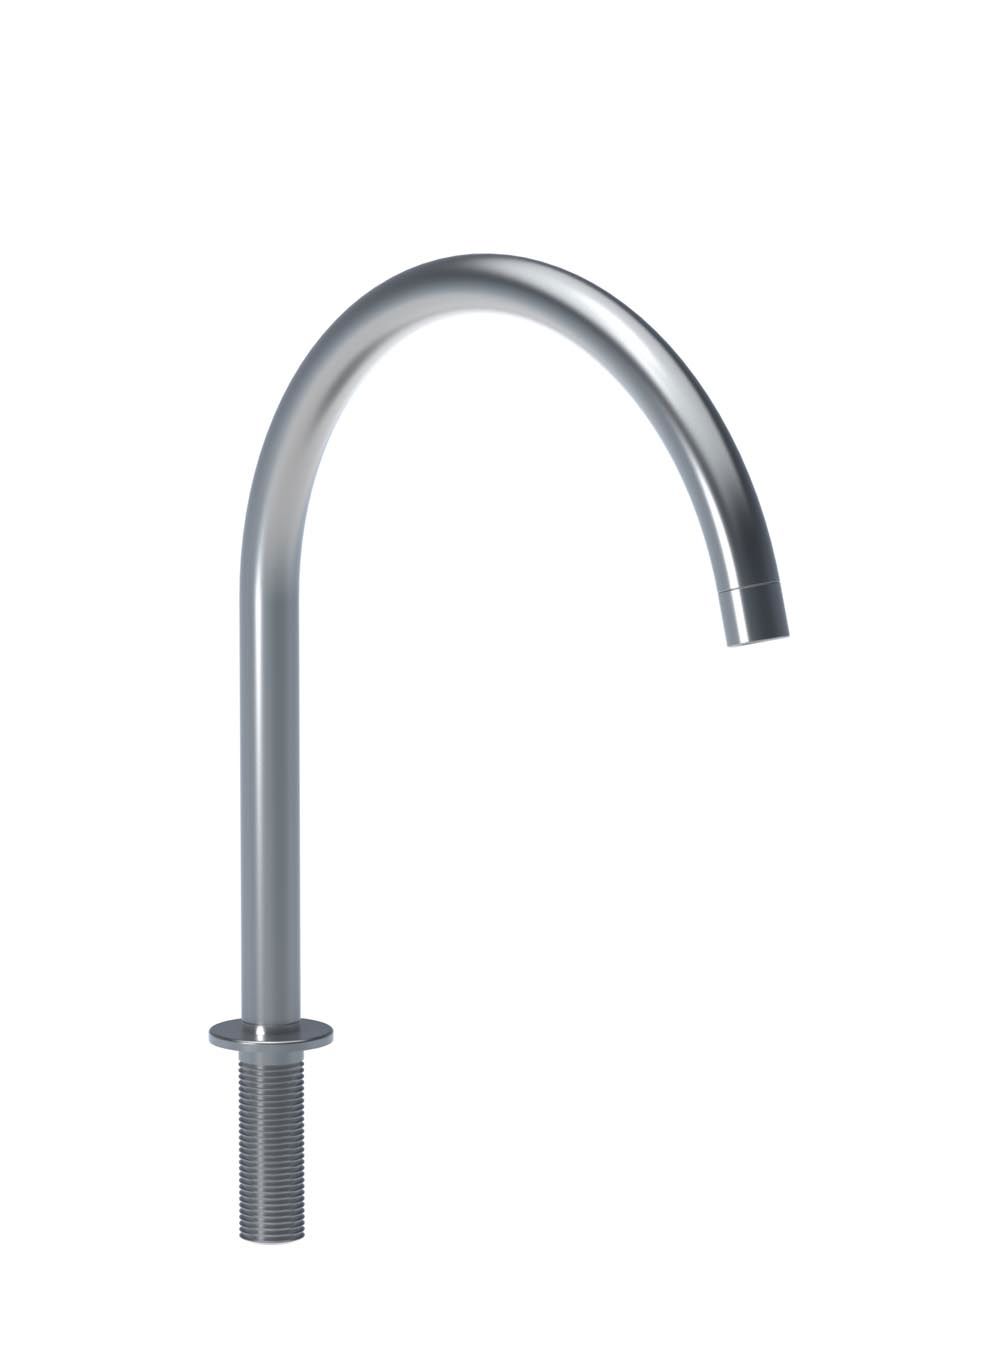 090H: Swivel spout. Height 265 mm. Hole cut out size: 22 mm.